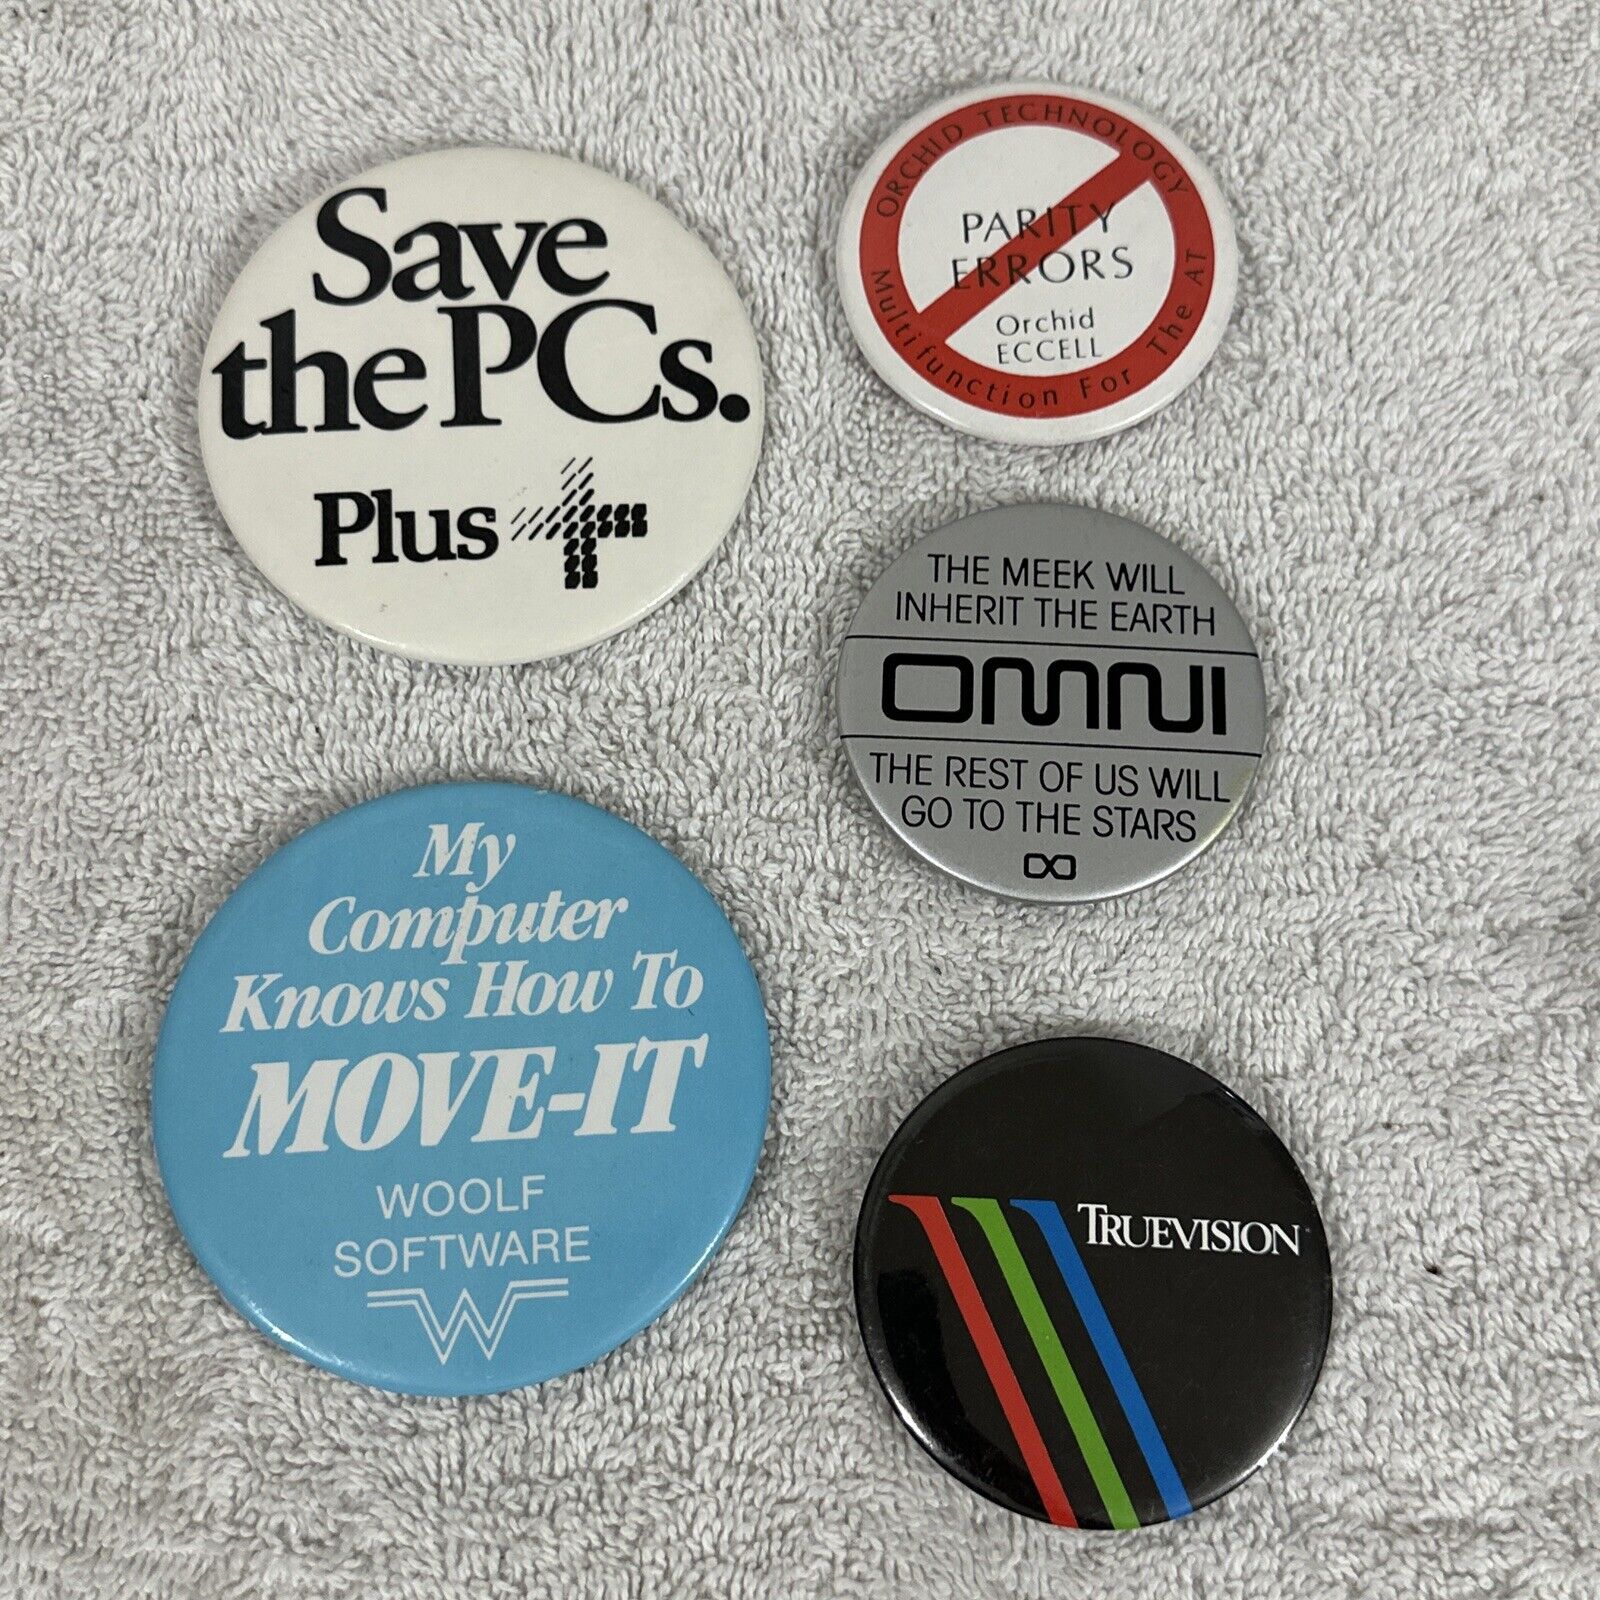 Lot of 5 Vintage Computer/Software Pinback Buttons 1980’s ~ TRUEVISION, OMNI